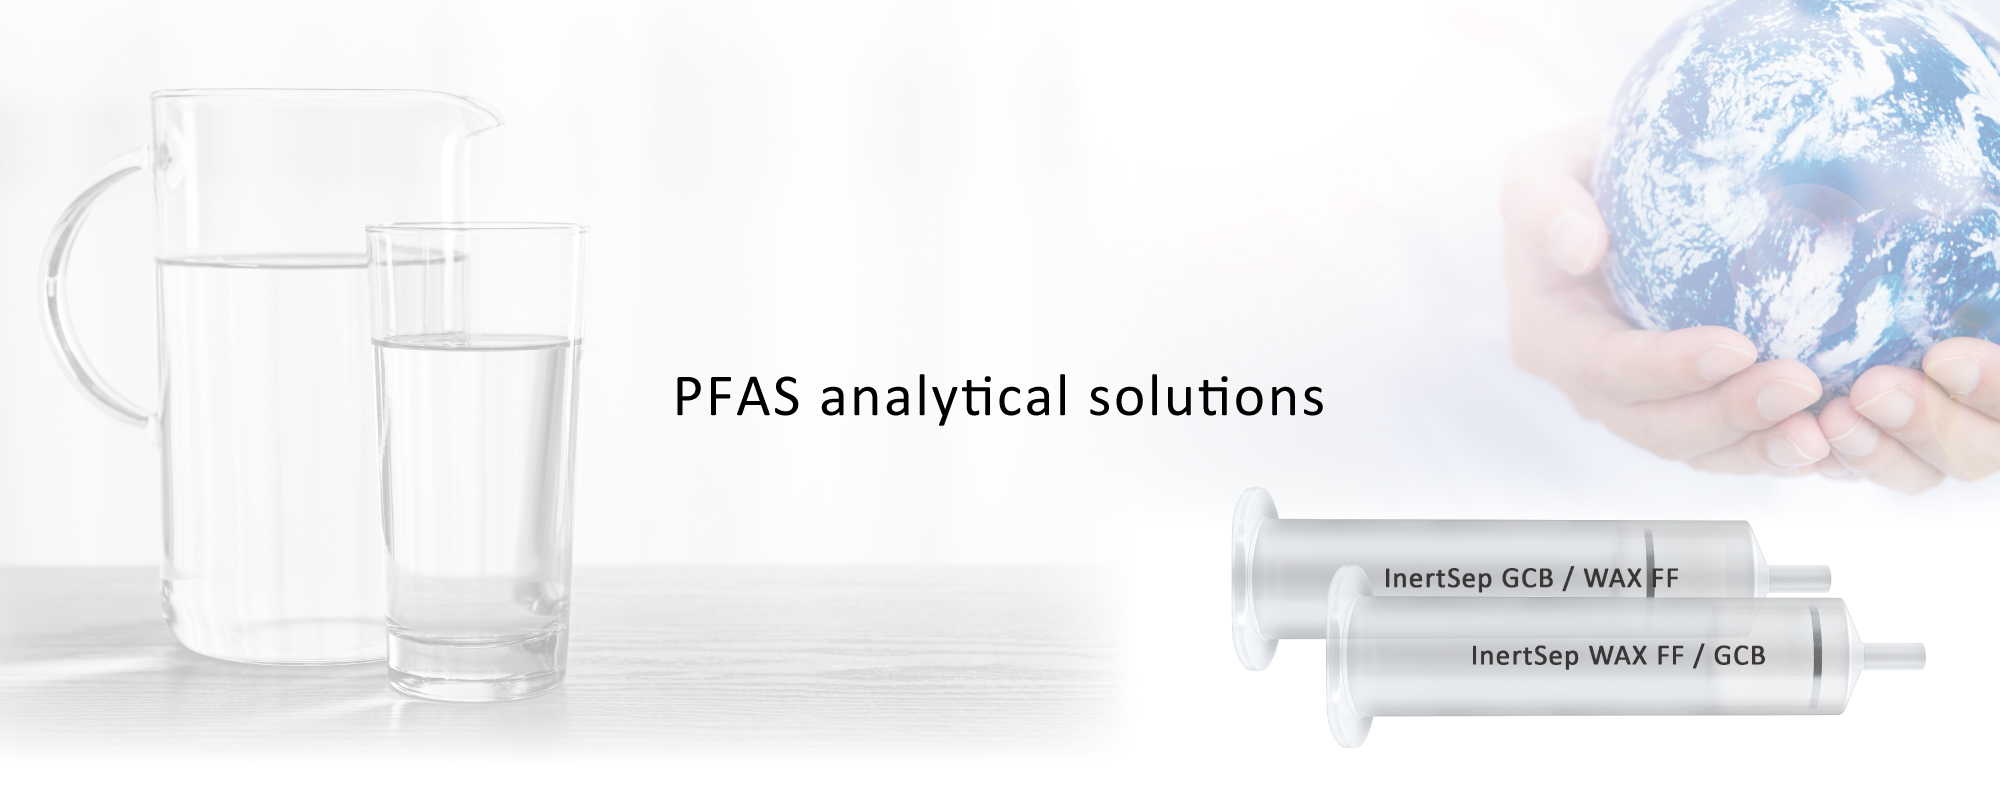 PFAS analytical solutions